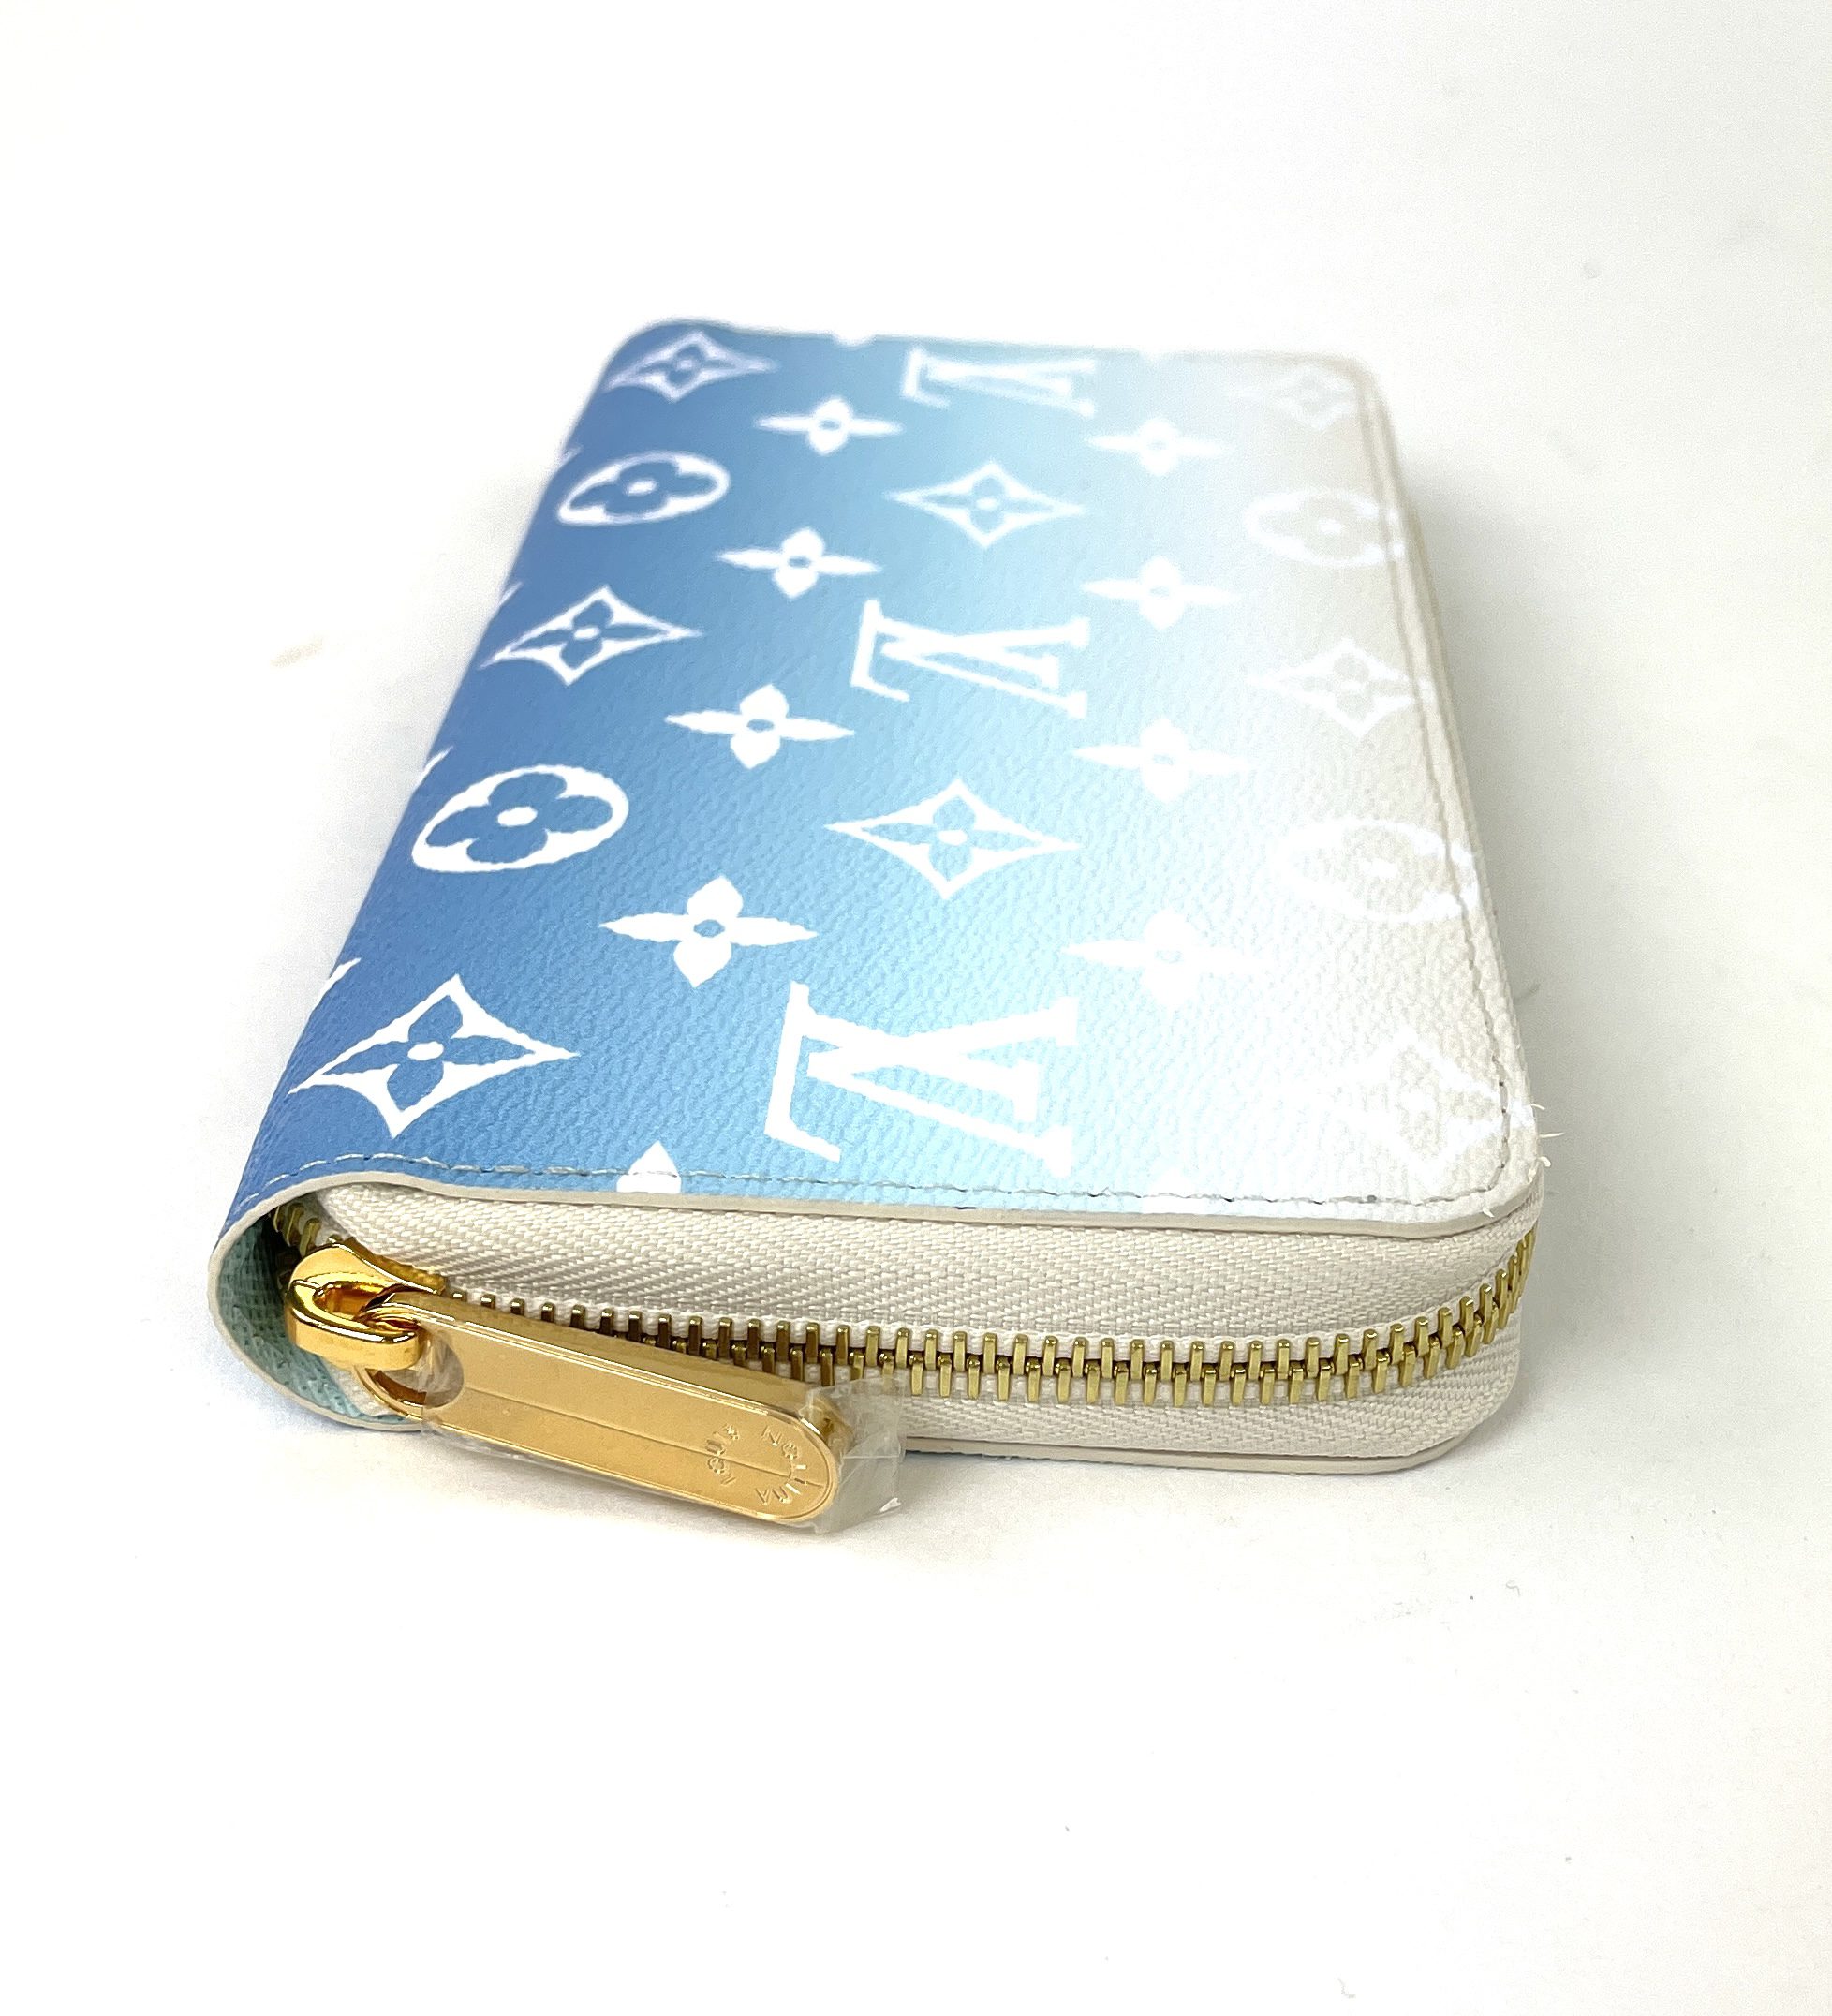 Louis Vuitton by The Pool Capsule Collection Gradation Tri-Fold Wallet